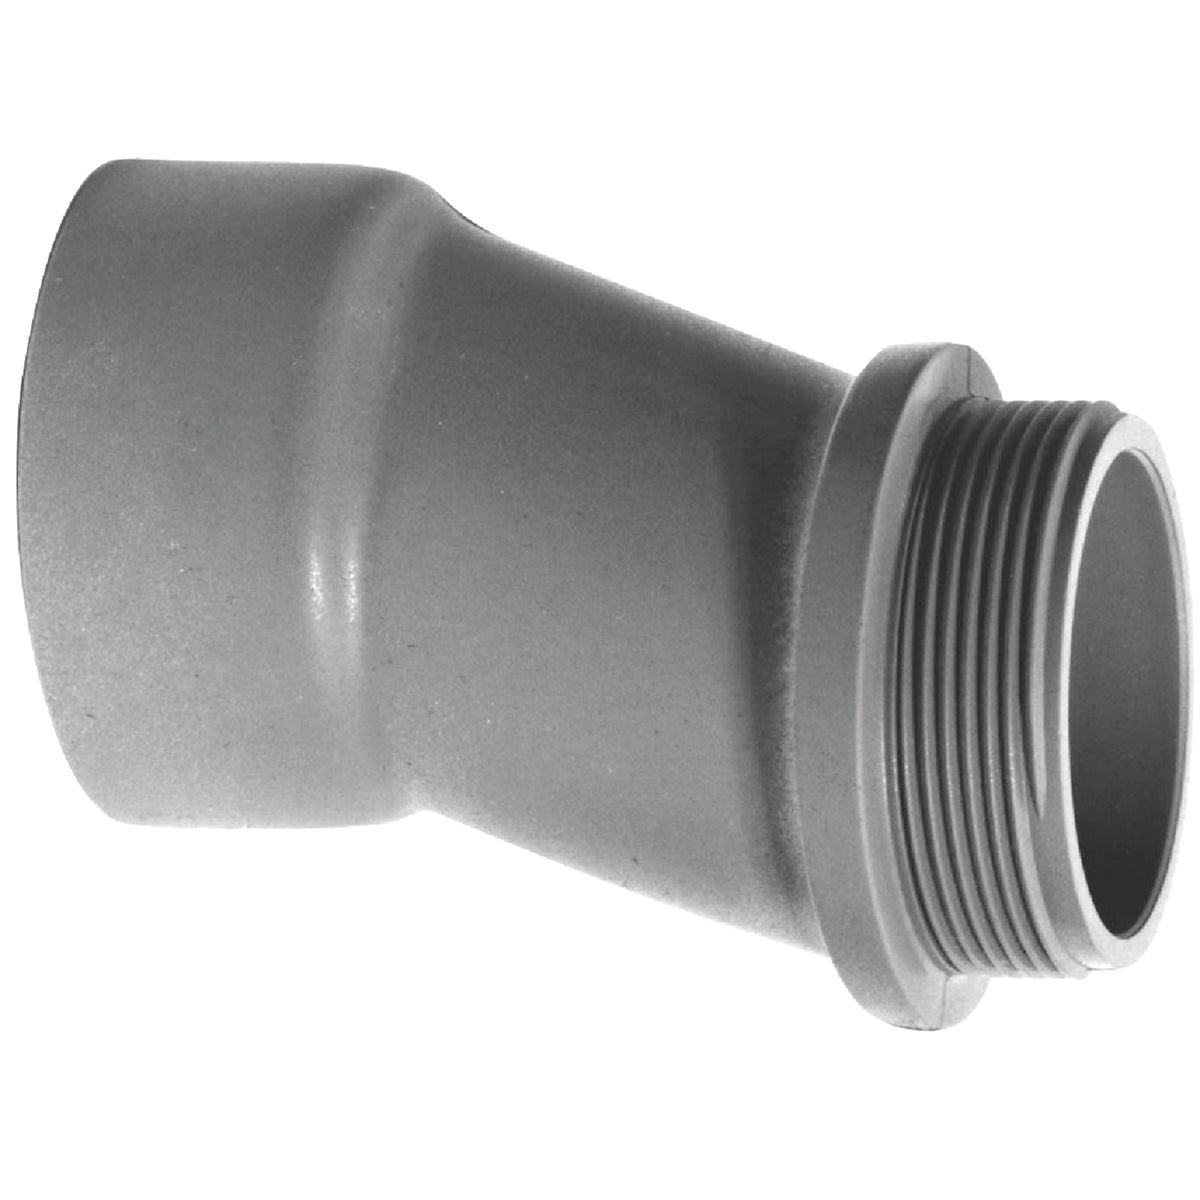 Carlon 1-1/4 In. PVC Offset Meter Connector